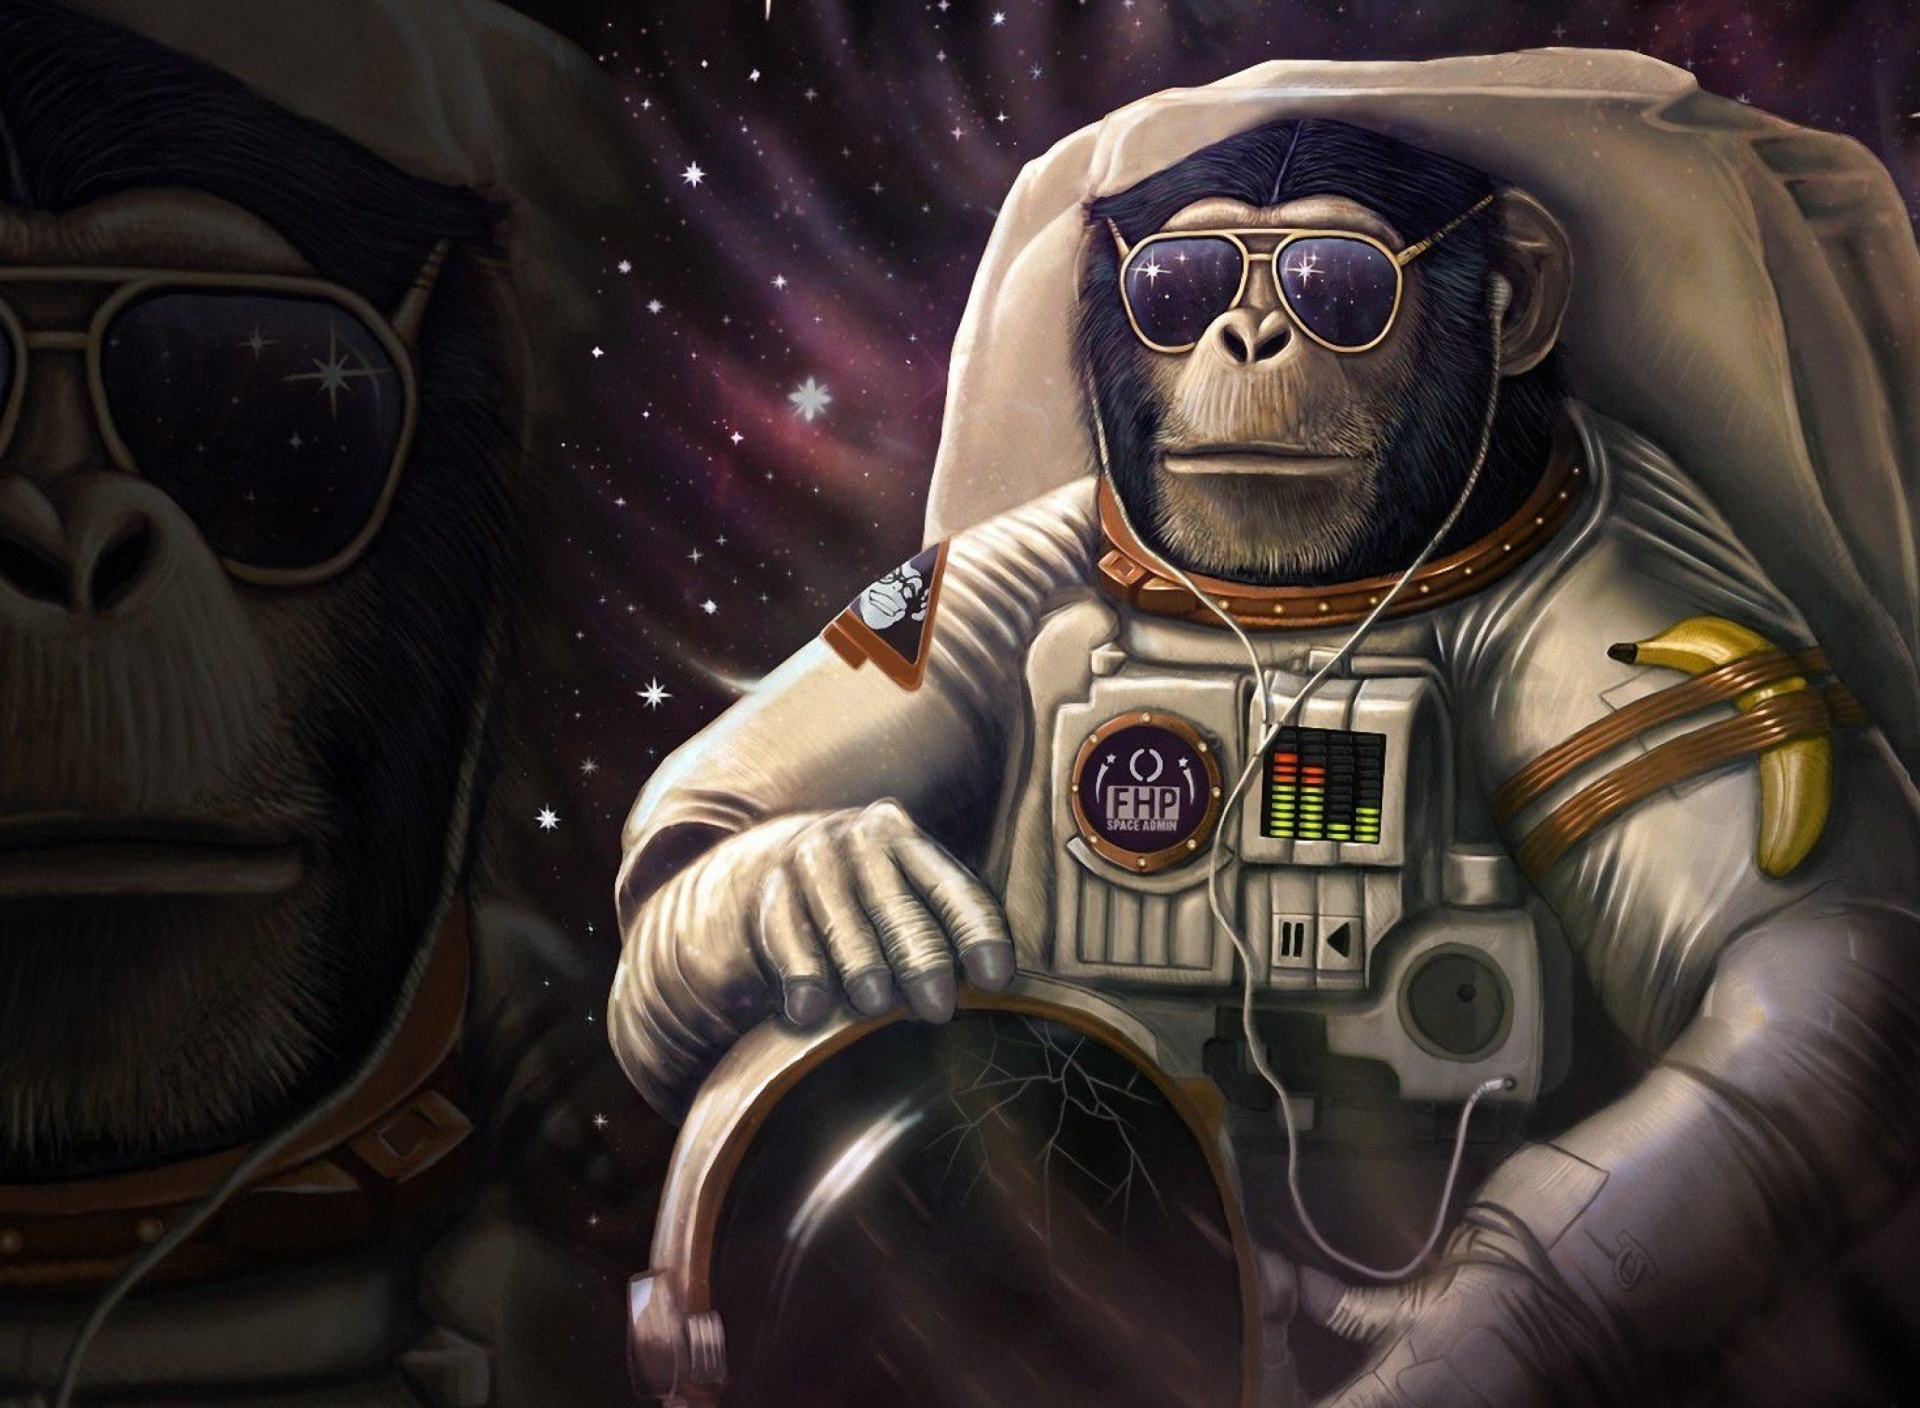 Monkeys and apes in space wallpaper 1920x1408